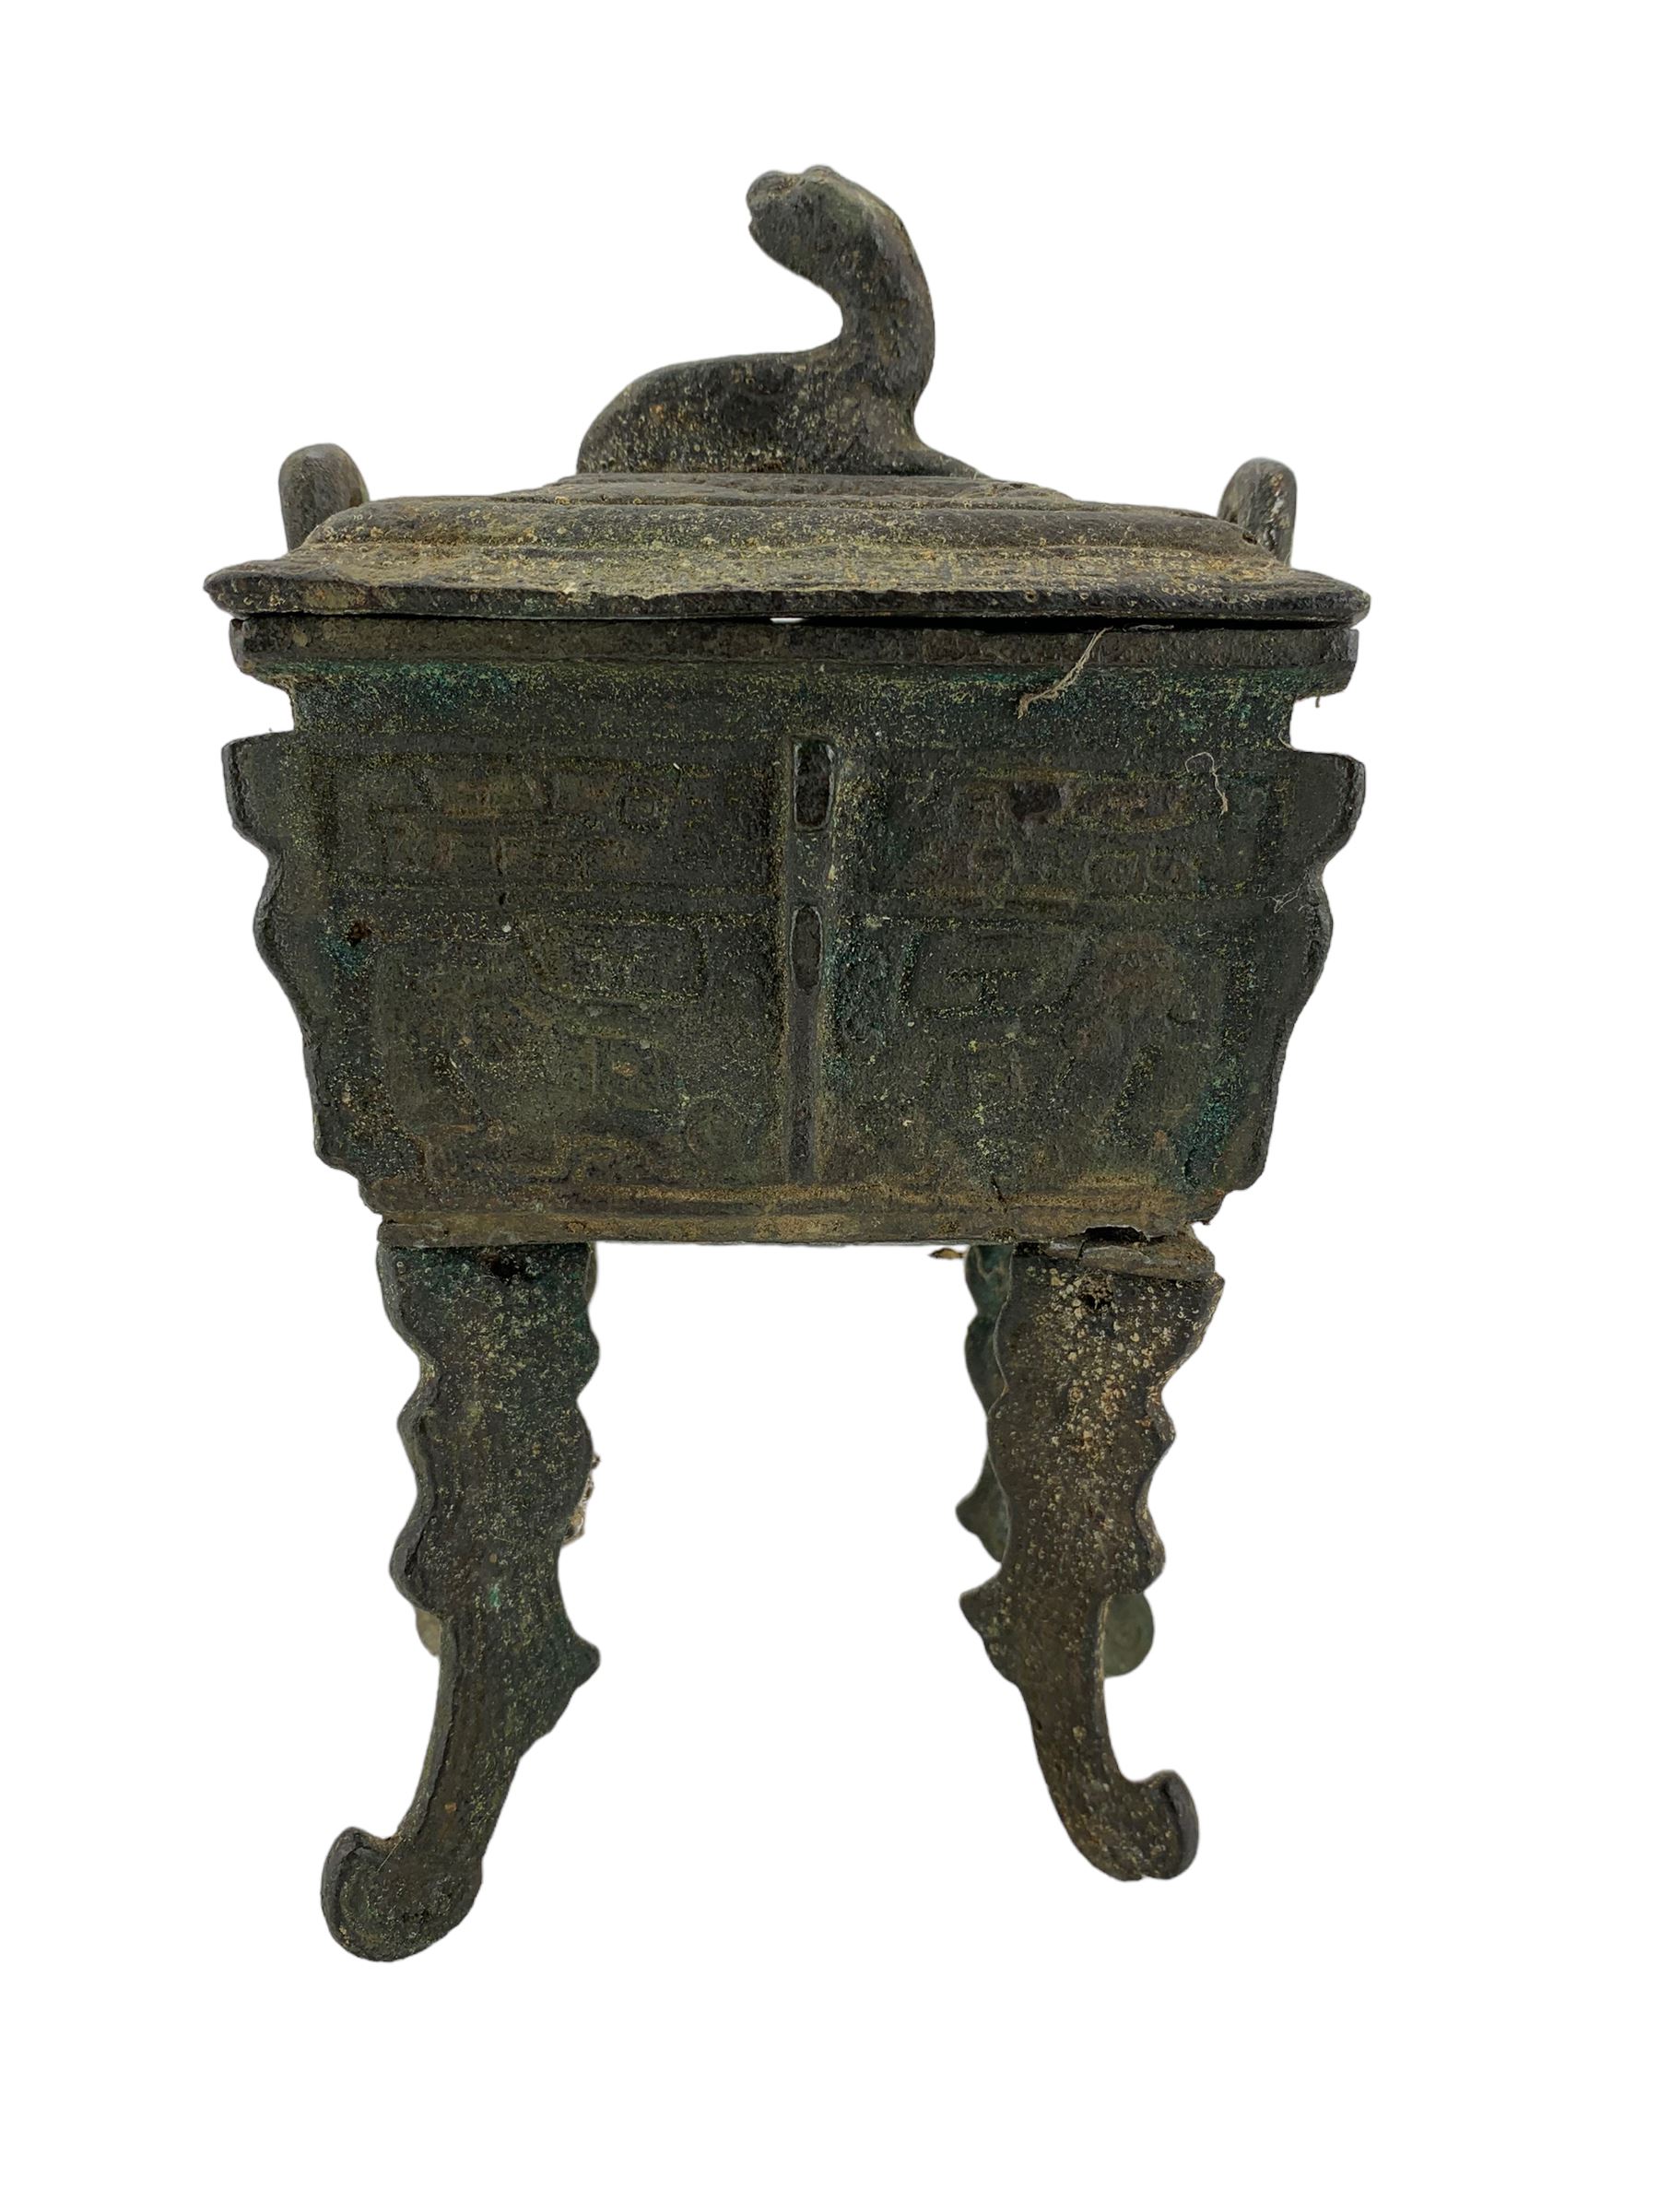 Chinese archaistic style censer of fang ding form - Image 5 of 7